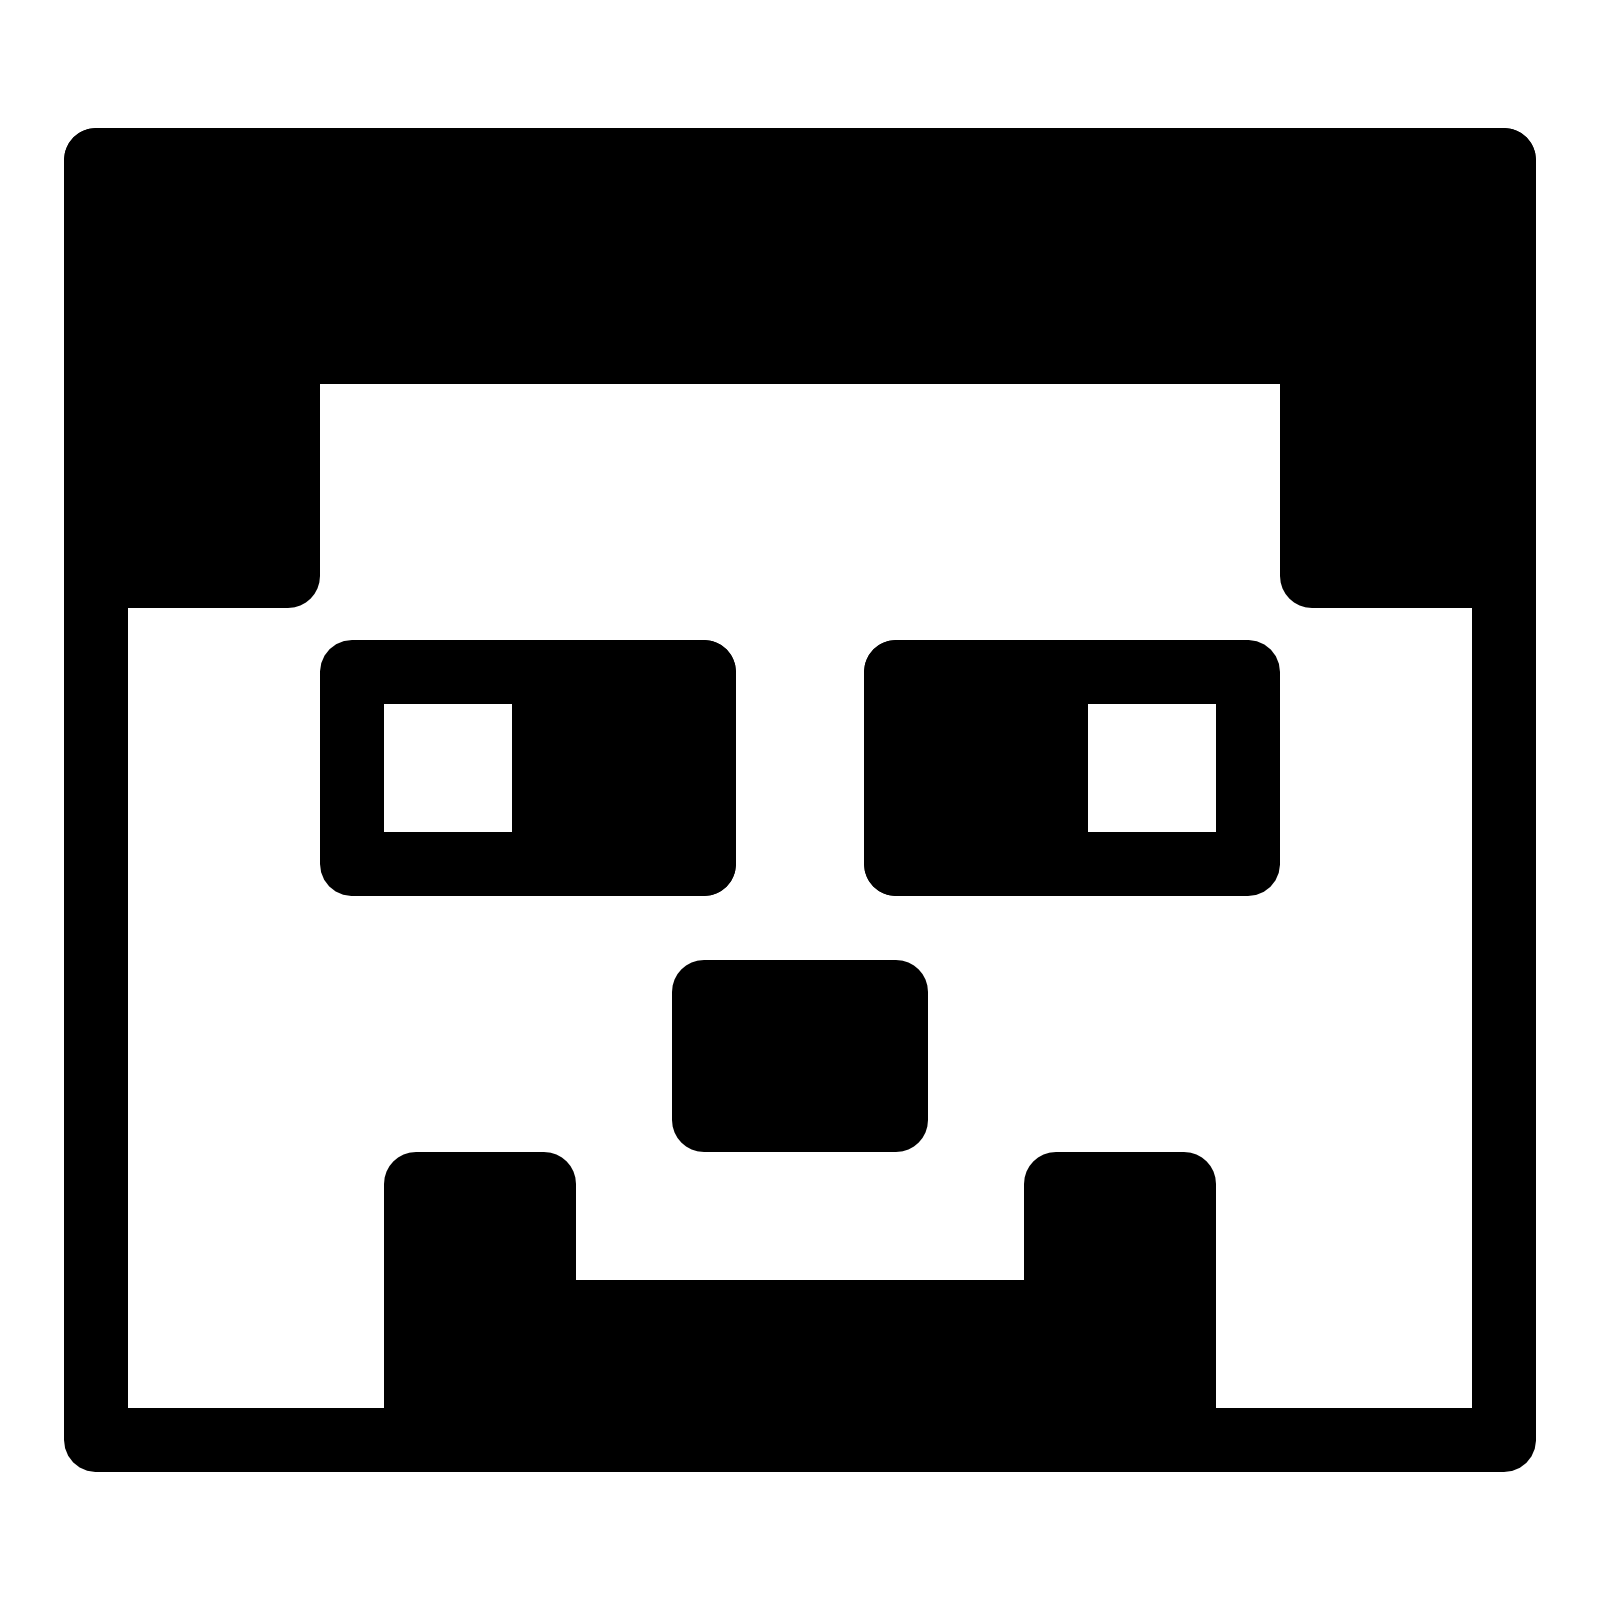 Minecraft clipart black and white.  collection of high